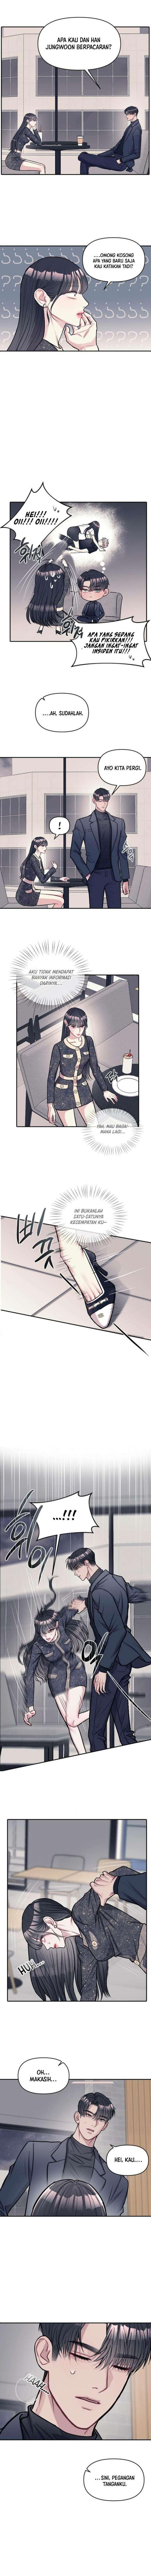 Undercover! Chaebol High School Chapter 06 - 65